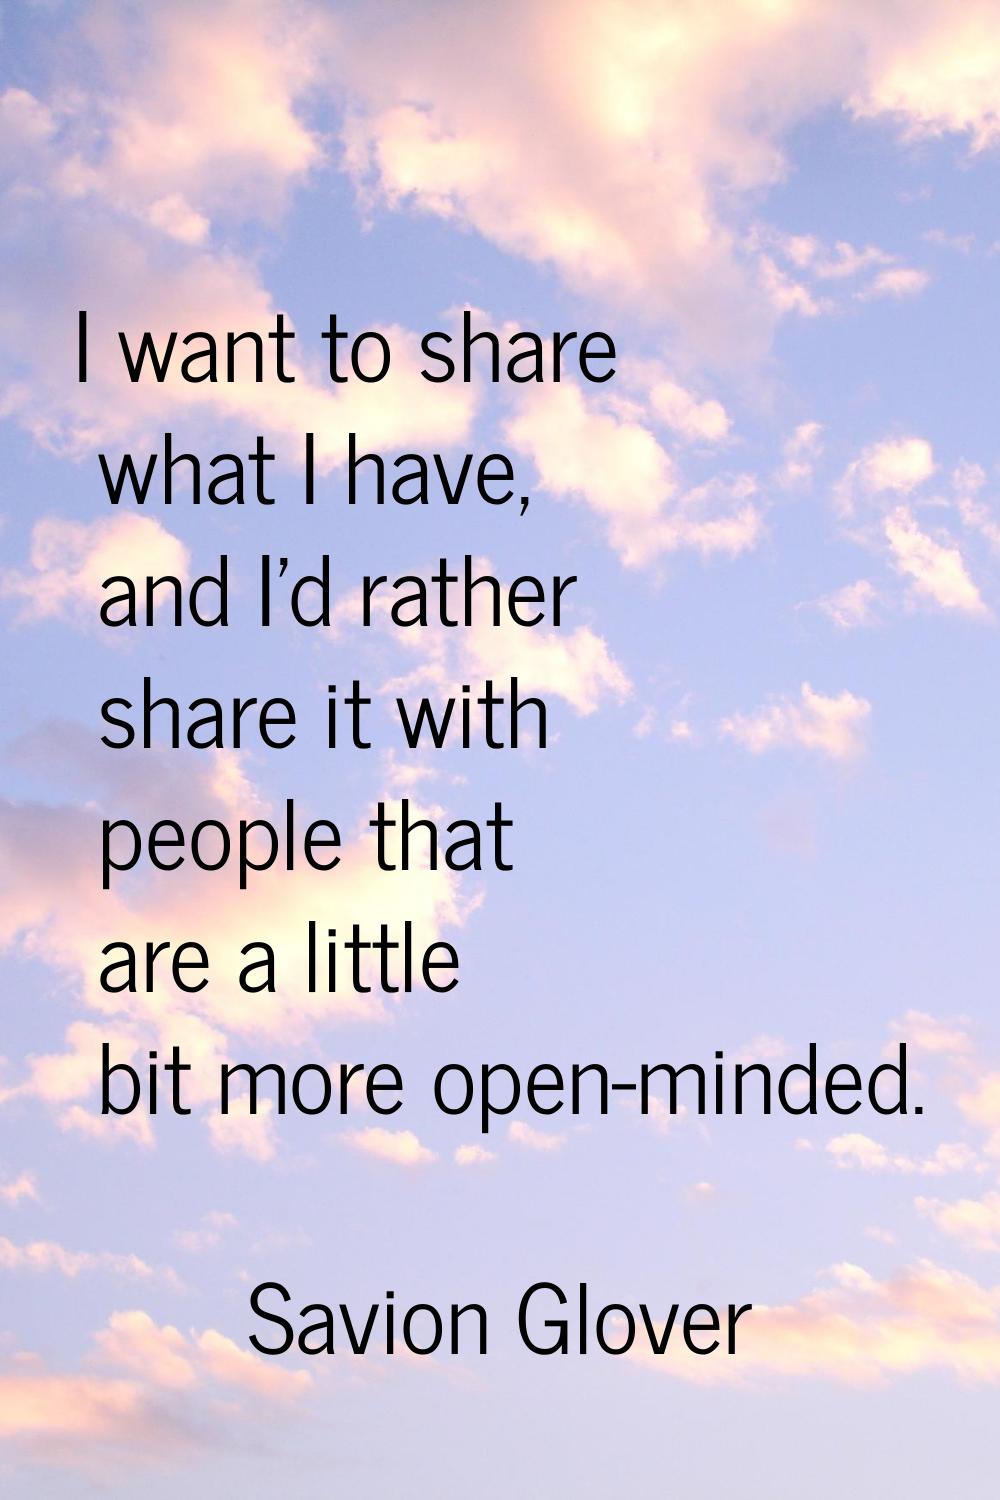 I want to share what I have, and I'd rather share it with people that are a little bit more open-mi